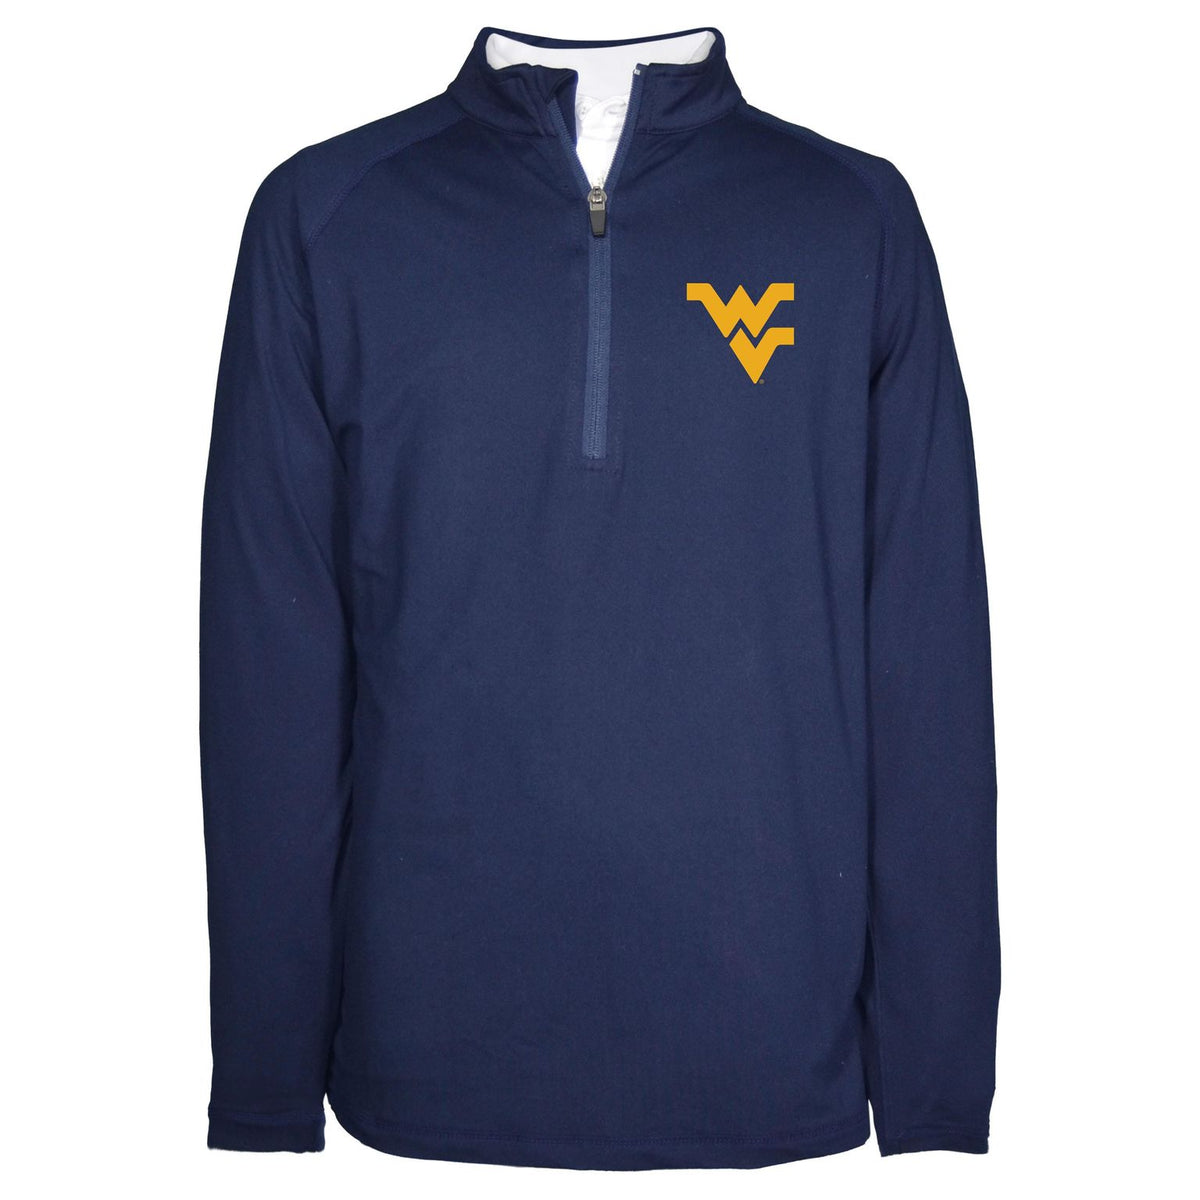 West Virginia Mountaineers Youth Boys' 1/4-Zip Pullover